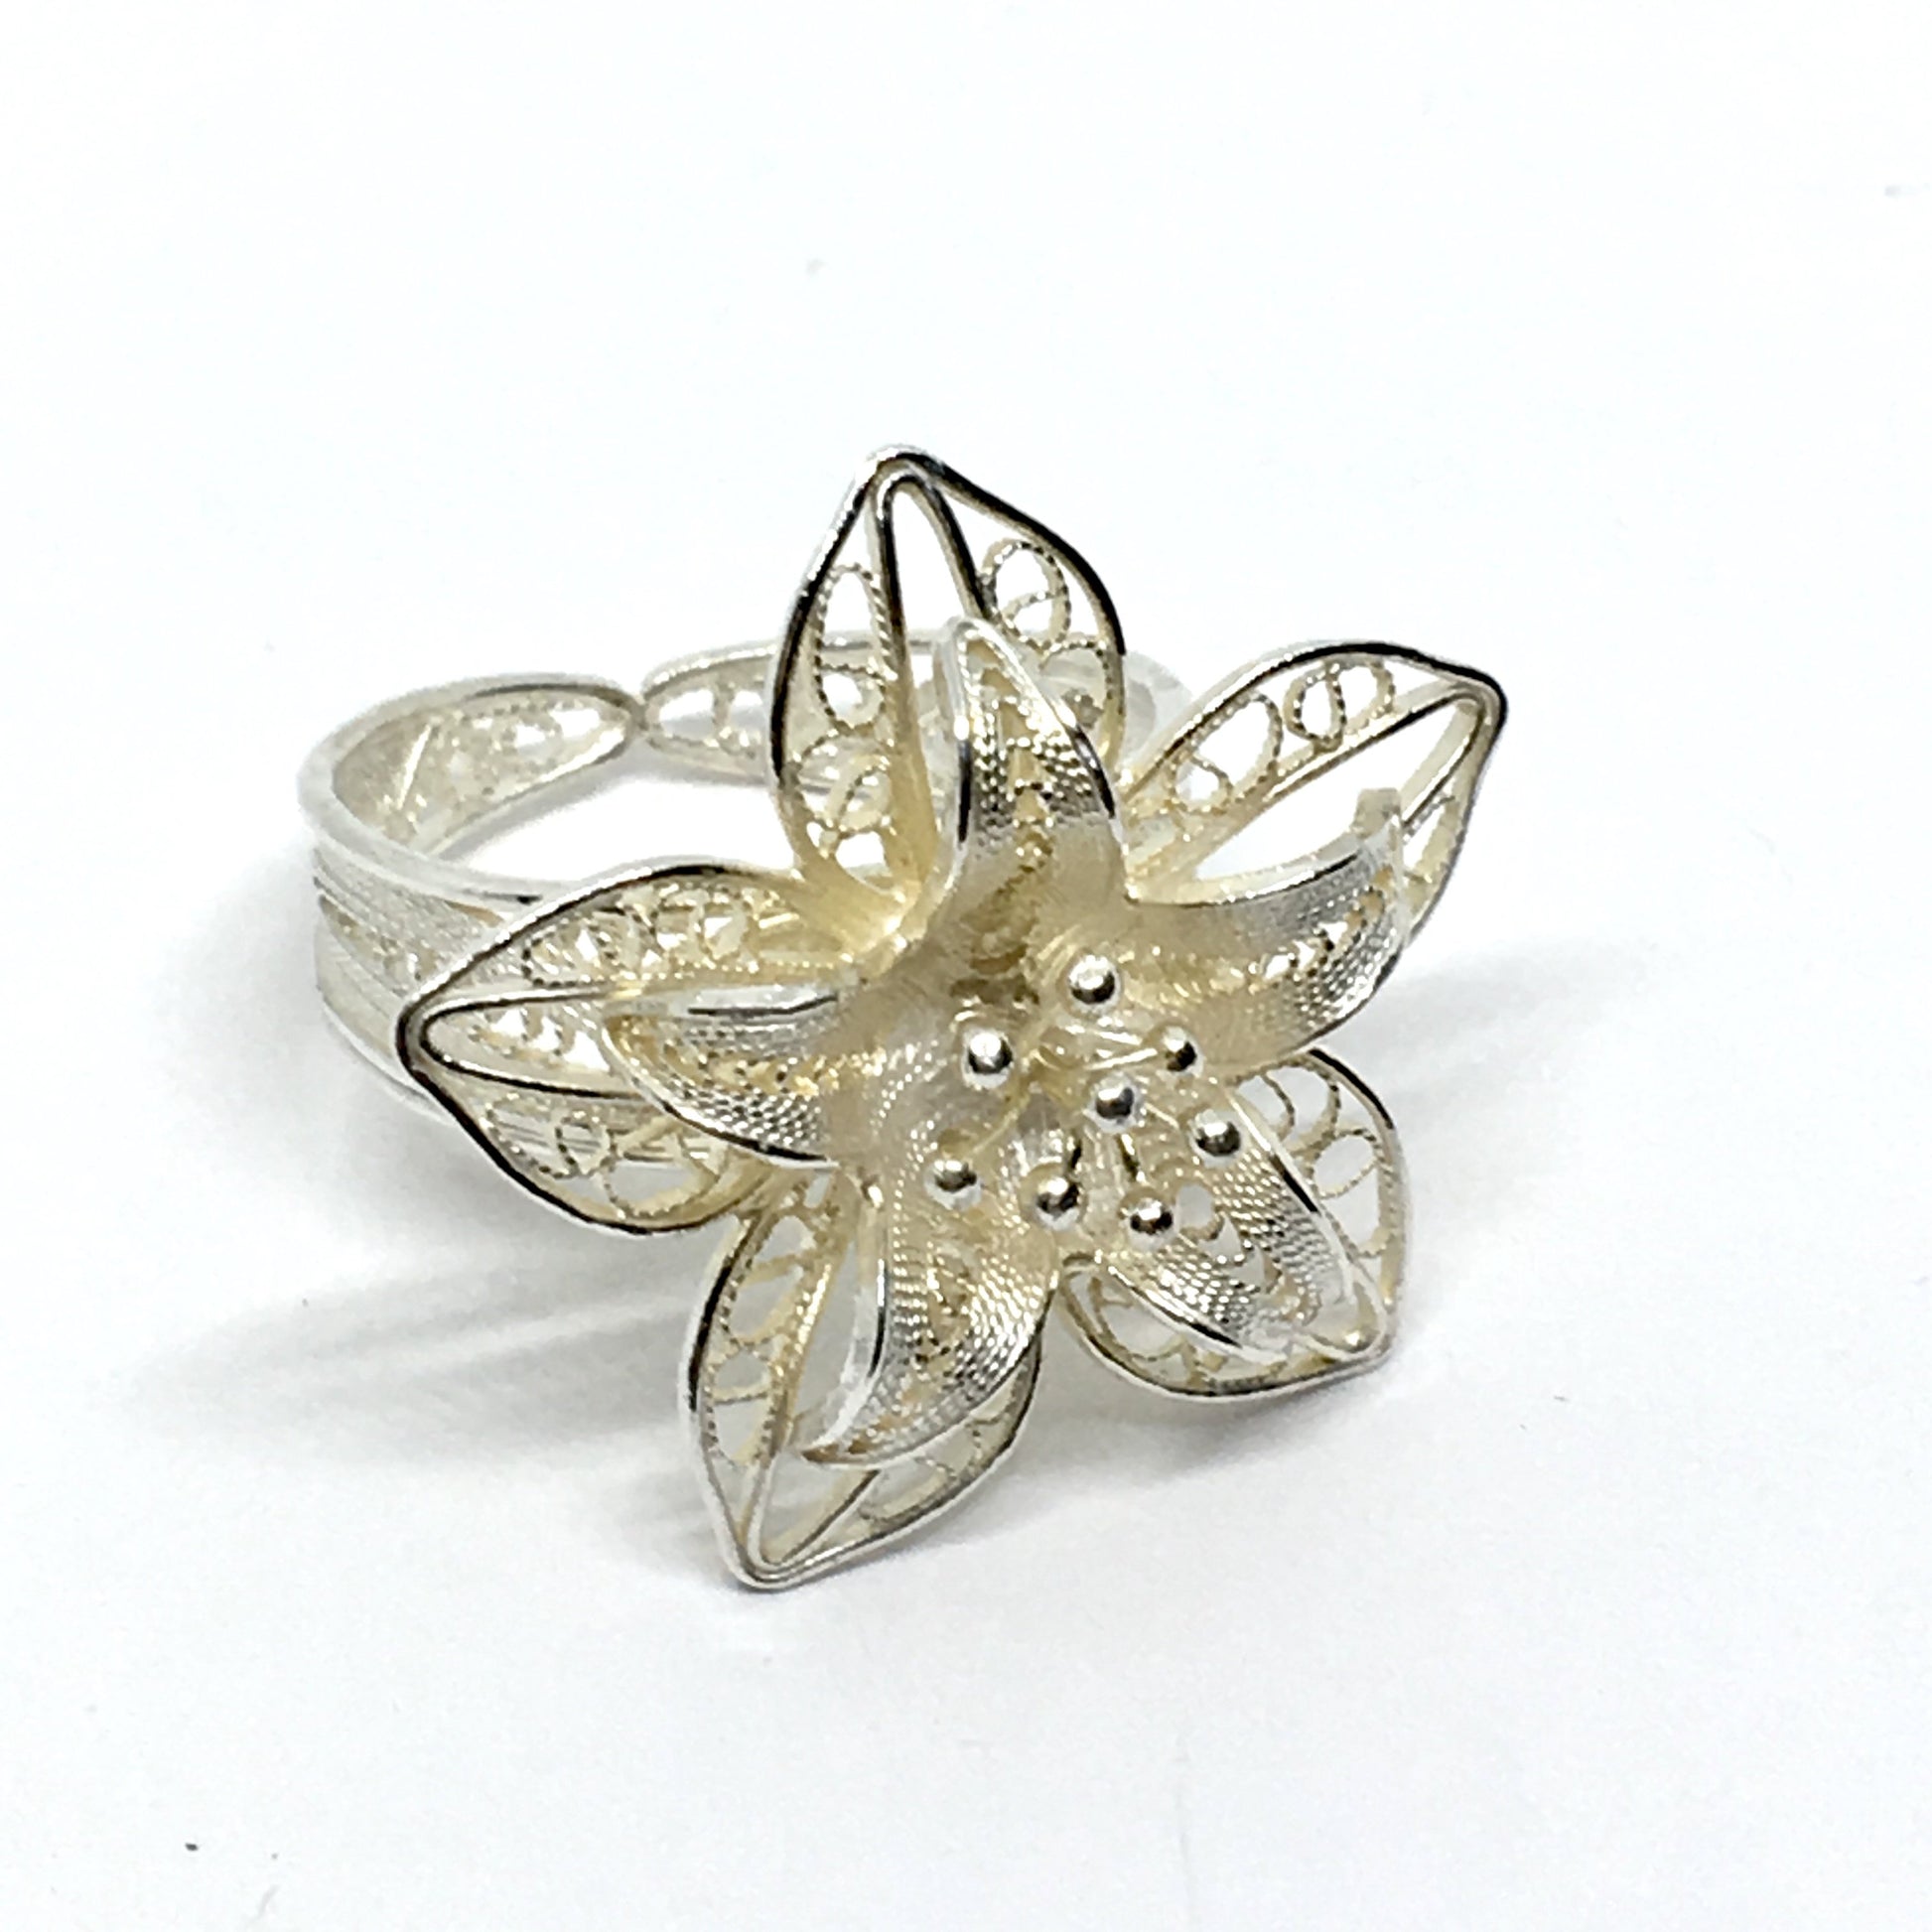 Jewelry > Ring - Vintage Floriculture Flair - Sterling Silver Ornate Filigree 3D Flower Design Ring 7.25